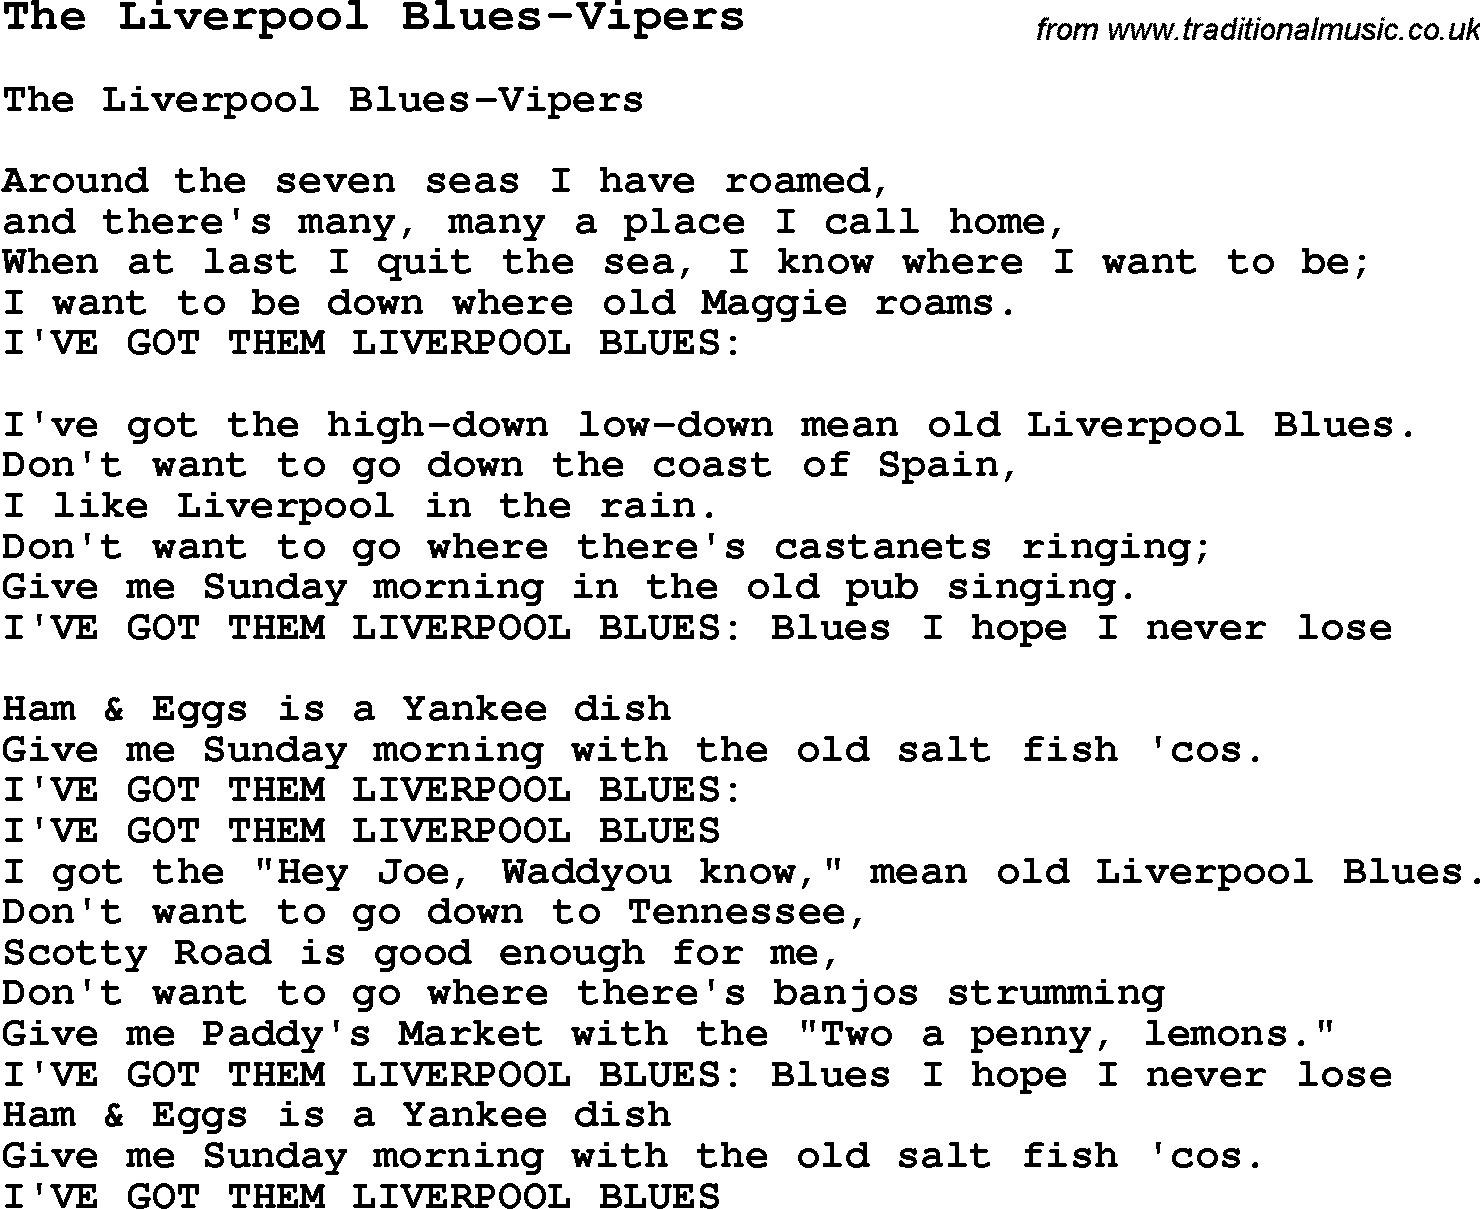 Skiffle Song Lyrics for The Liverpool Blues-Vipers.